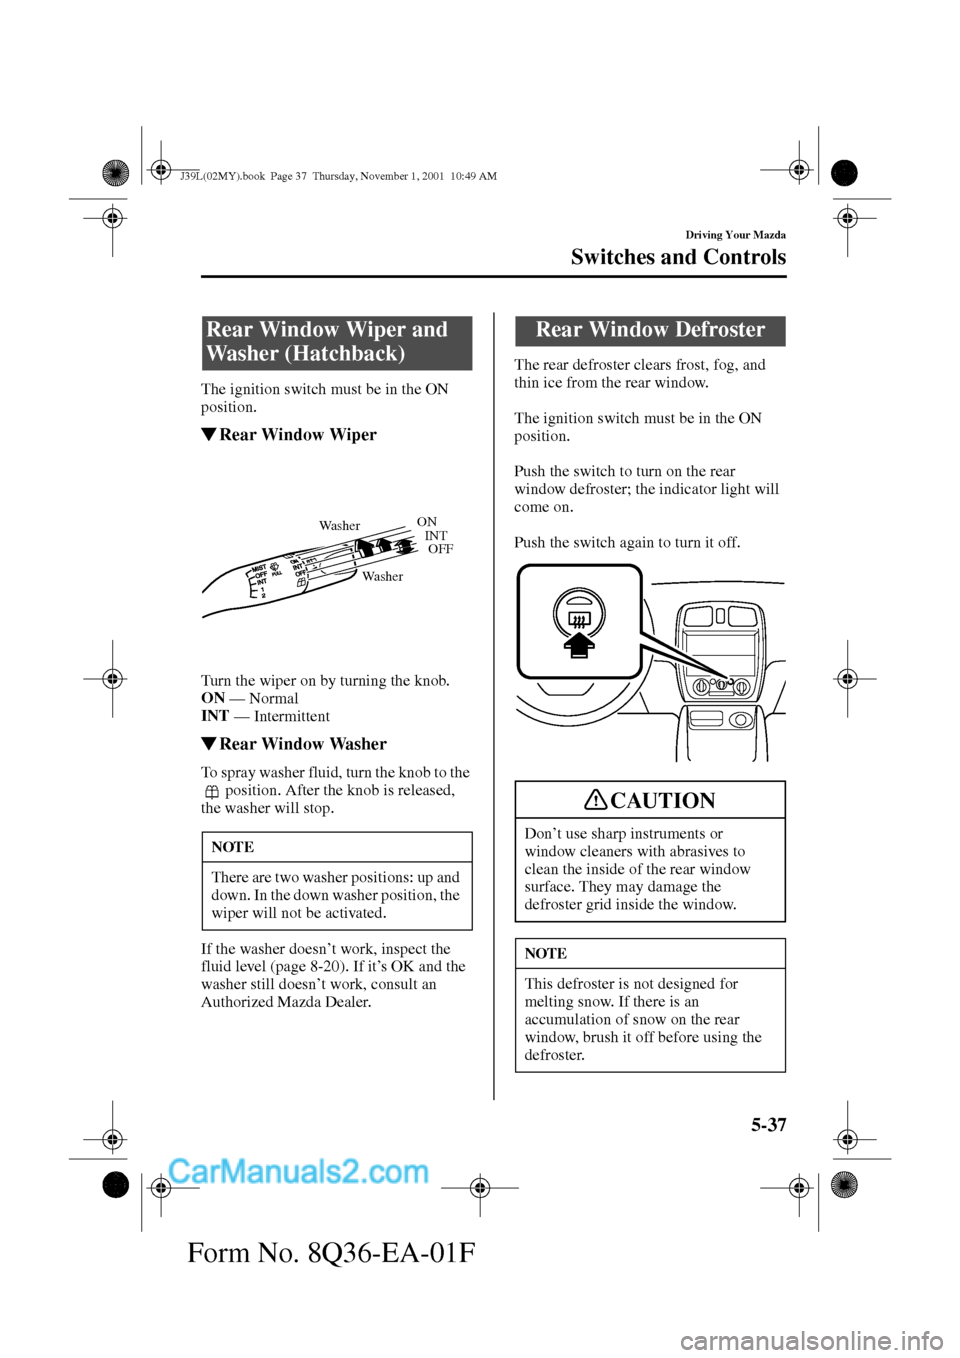 MAZDA MODEL PROTÉGÉ 2002  Owners Manual (in English) 5-37
Driving Your Mazda
Switches and Controls
Form No. 8Q36-EA-01F
The ignition switch must be in the ON 
position.
Rear Window Wiper
Turn the wiper on by turning the knob.
ON 
— 
Normal
INT 
— 
